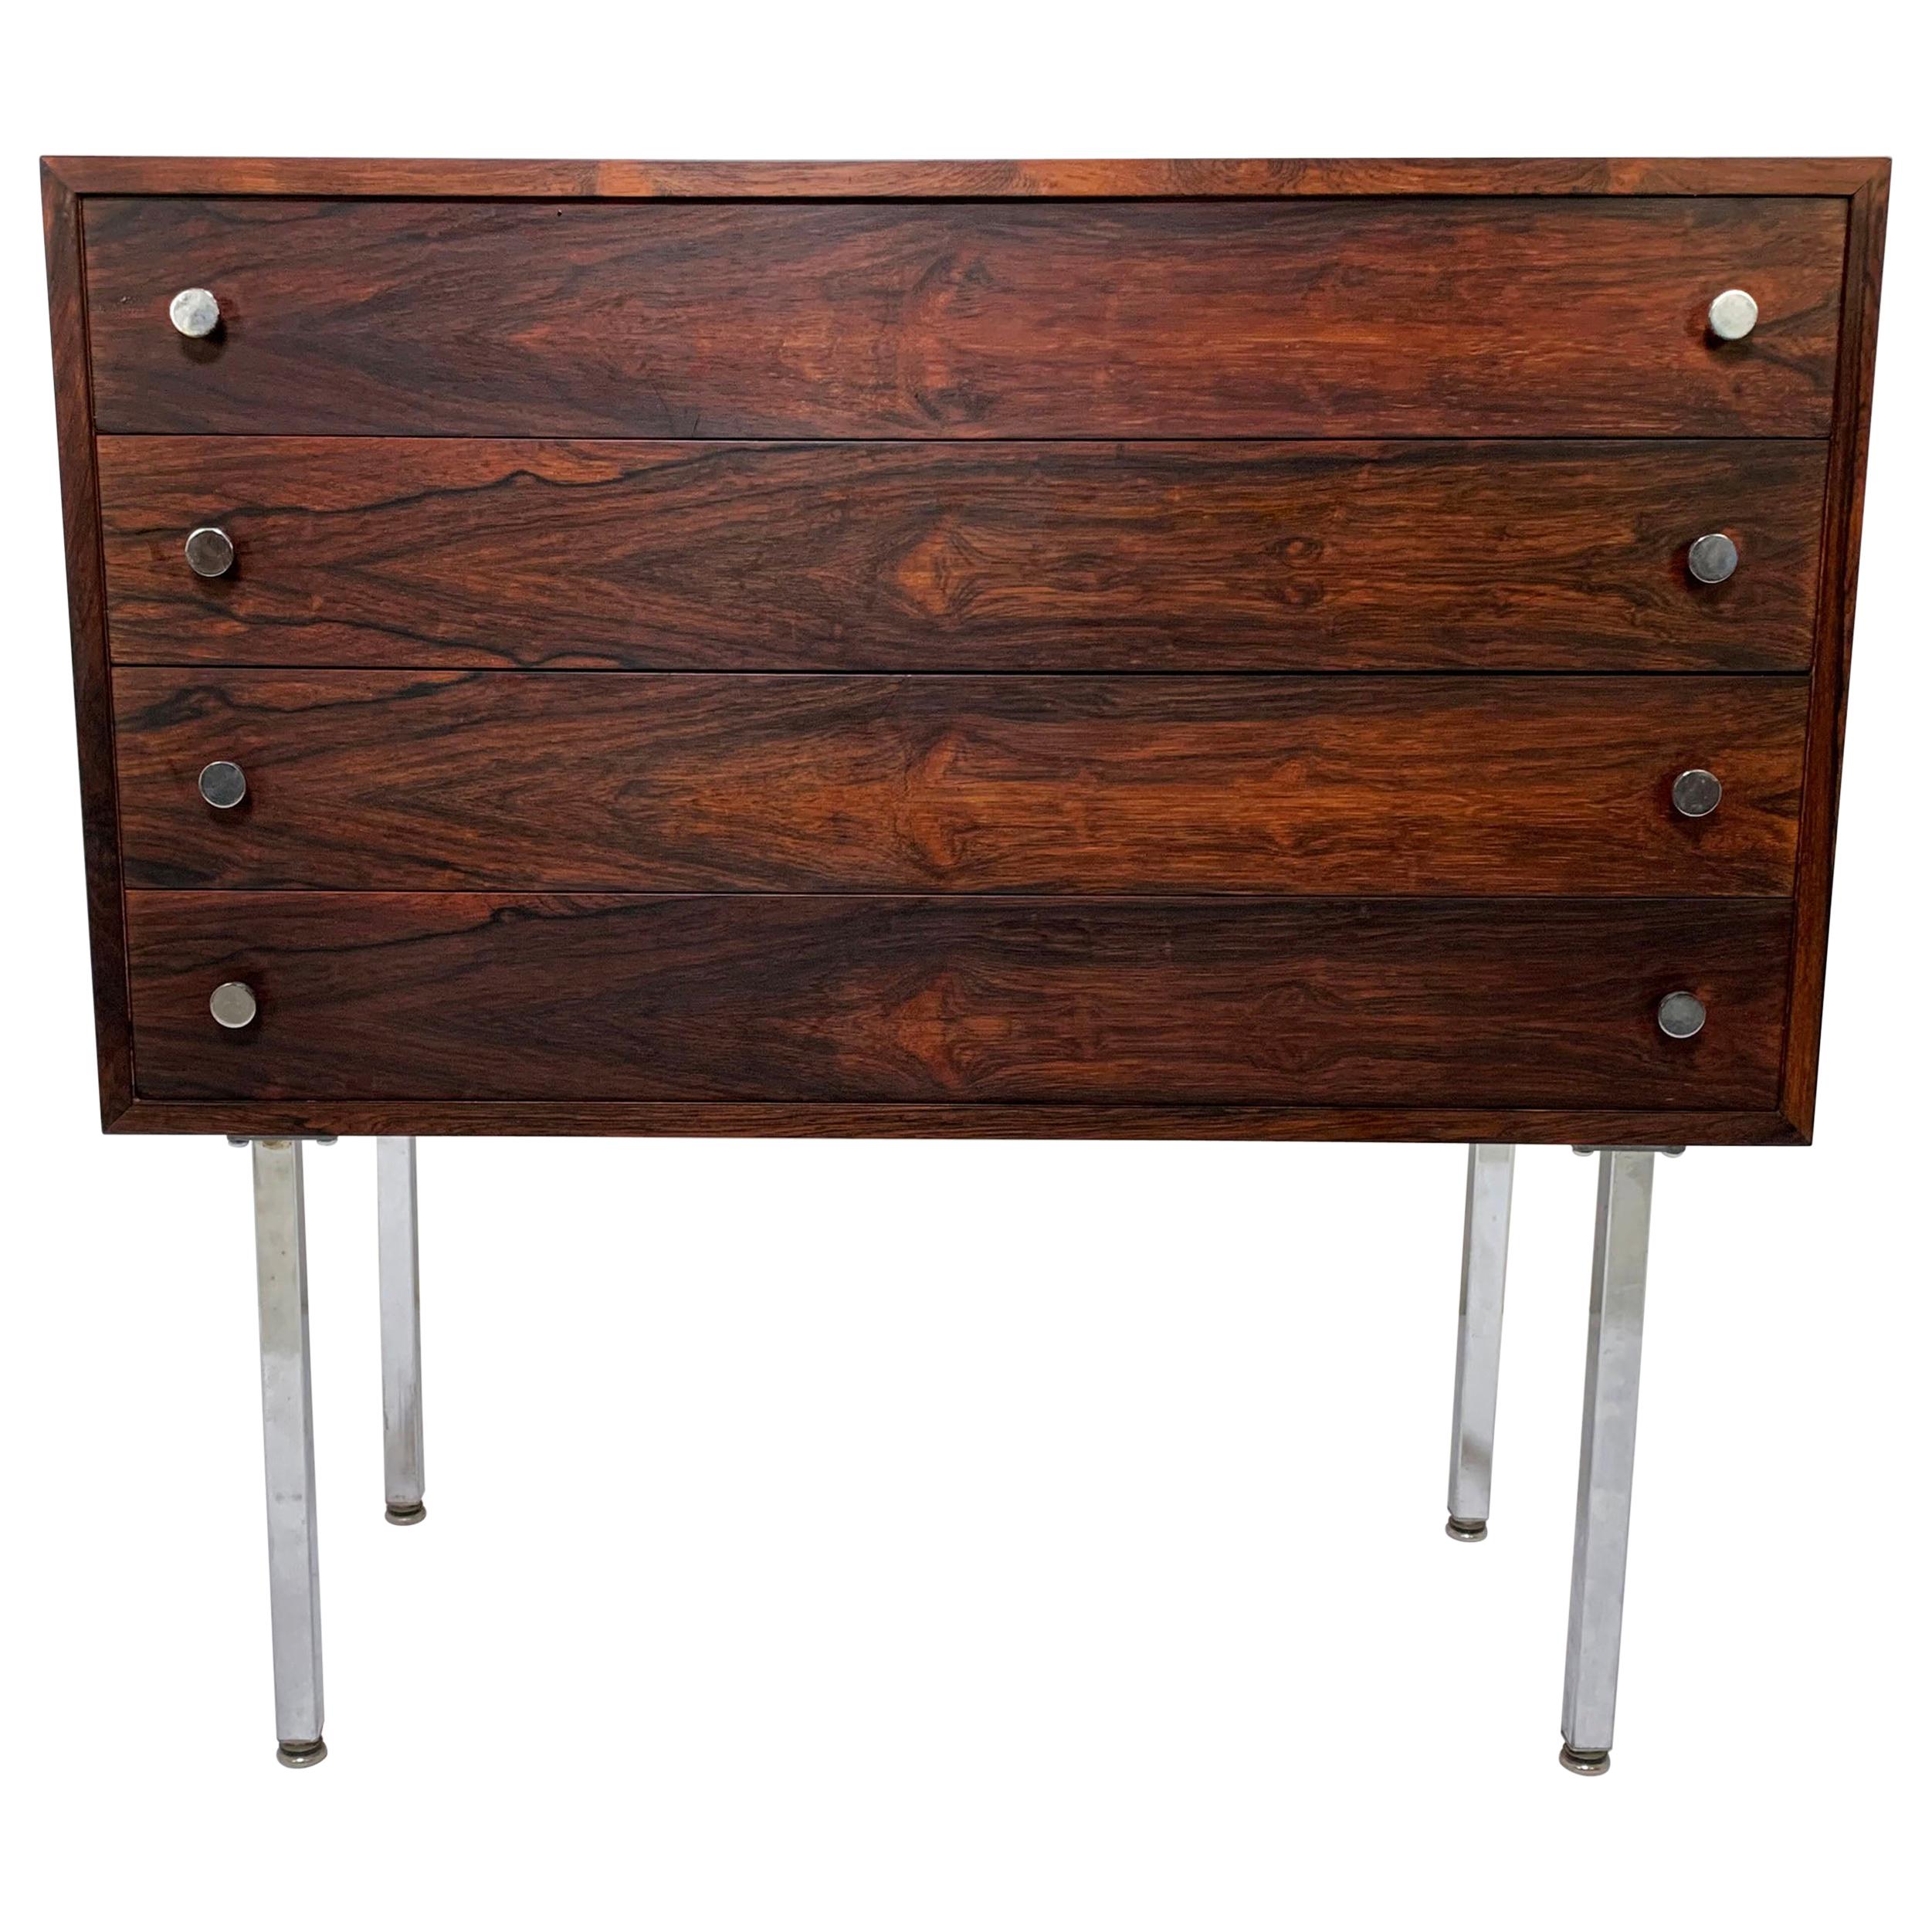 Poul Norreklit Danish Rosewood Four-Drawer Chest for Georg Petersens